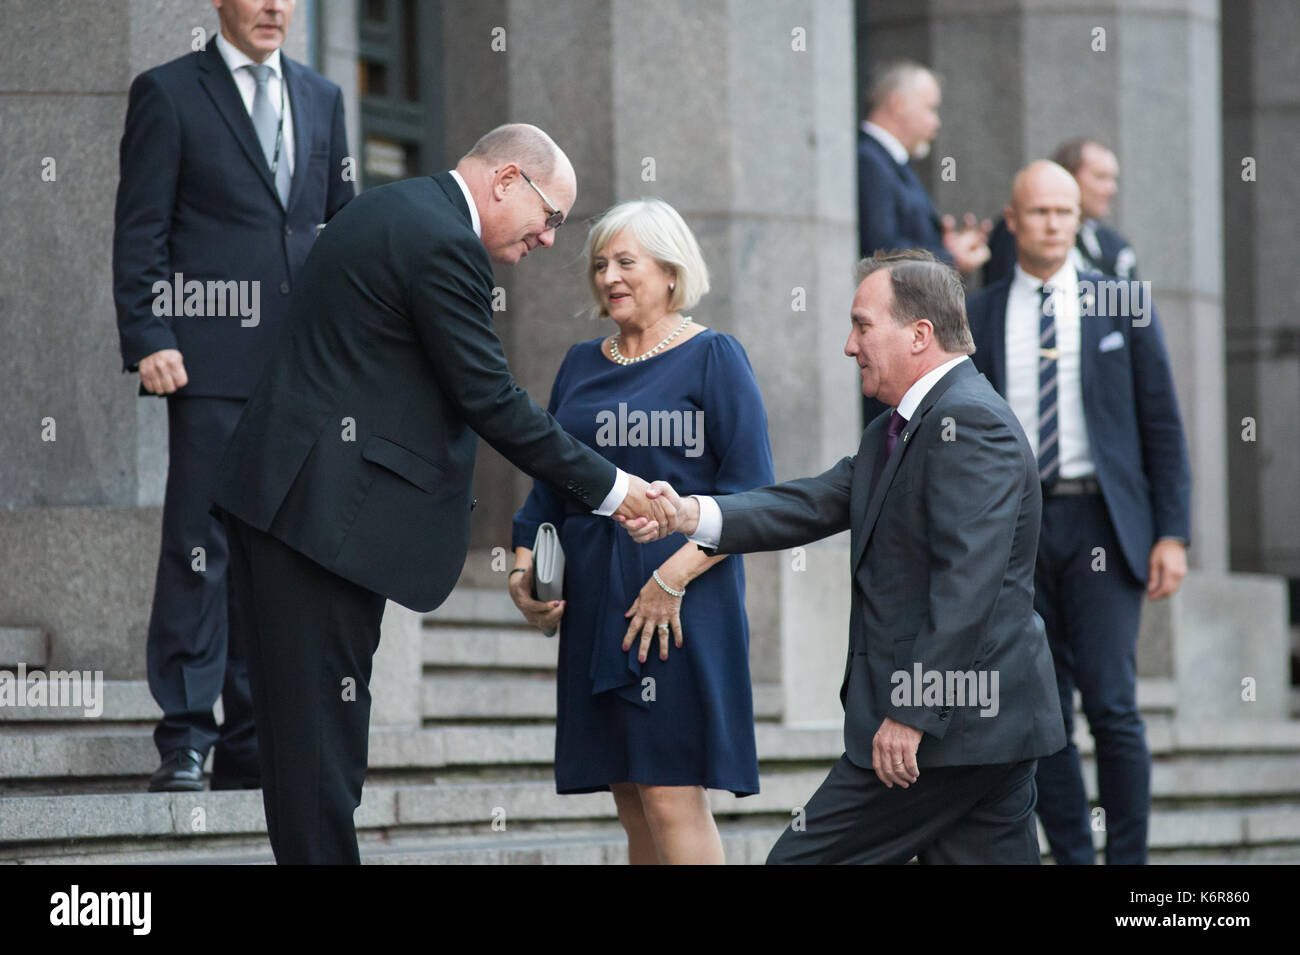 Stockholm, Sweden, 12th September, 2017. Opening of the Riksdag. Tonights concert at Stockholm Concert Hall, due to the opening of the Riksdag.First Speaker of the Riksdag Urban Ahlin, welcomes PM Stefan Lofven (S) and his wife Ulla Lofven.Credit: Barbro Bergfeldt/Alamy Live News Stock Photo